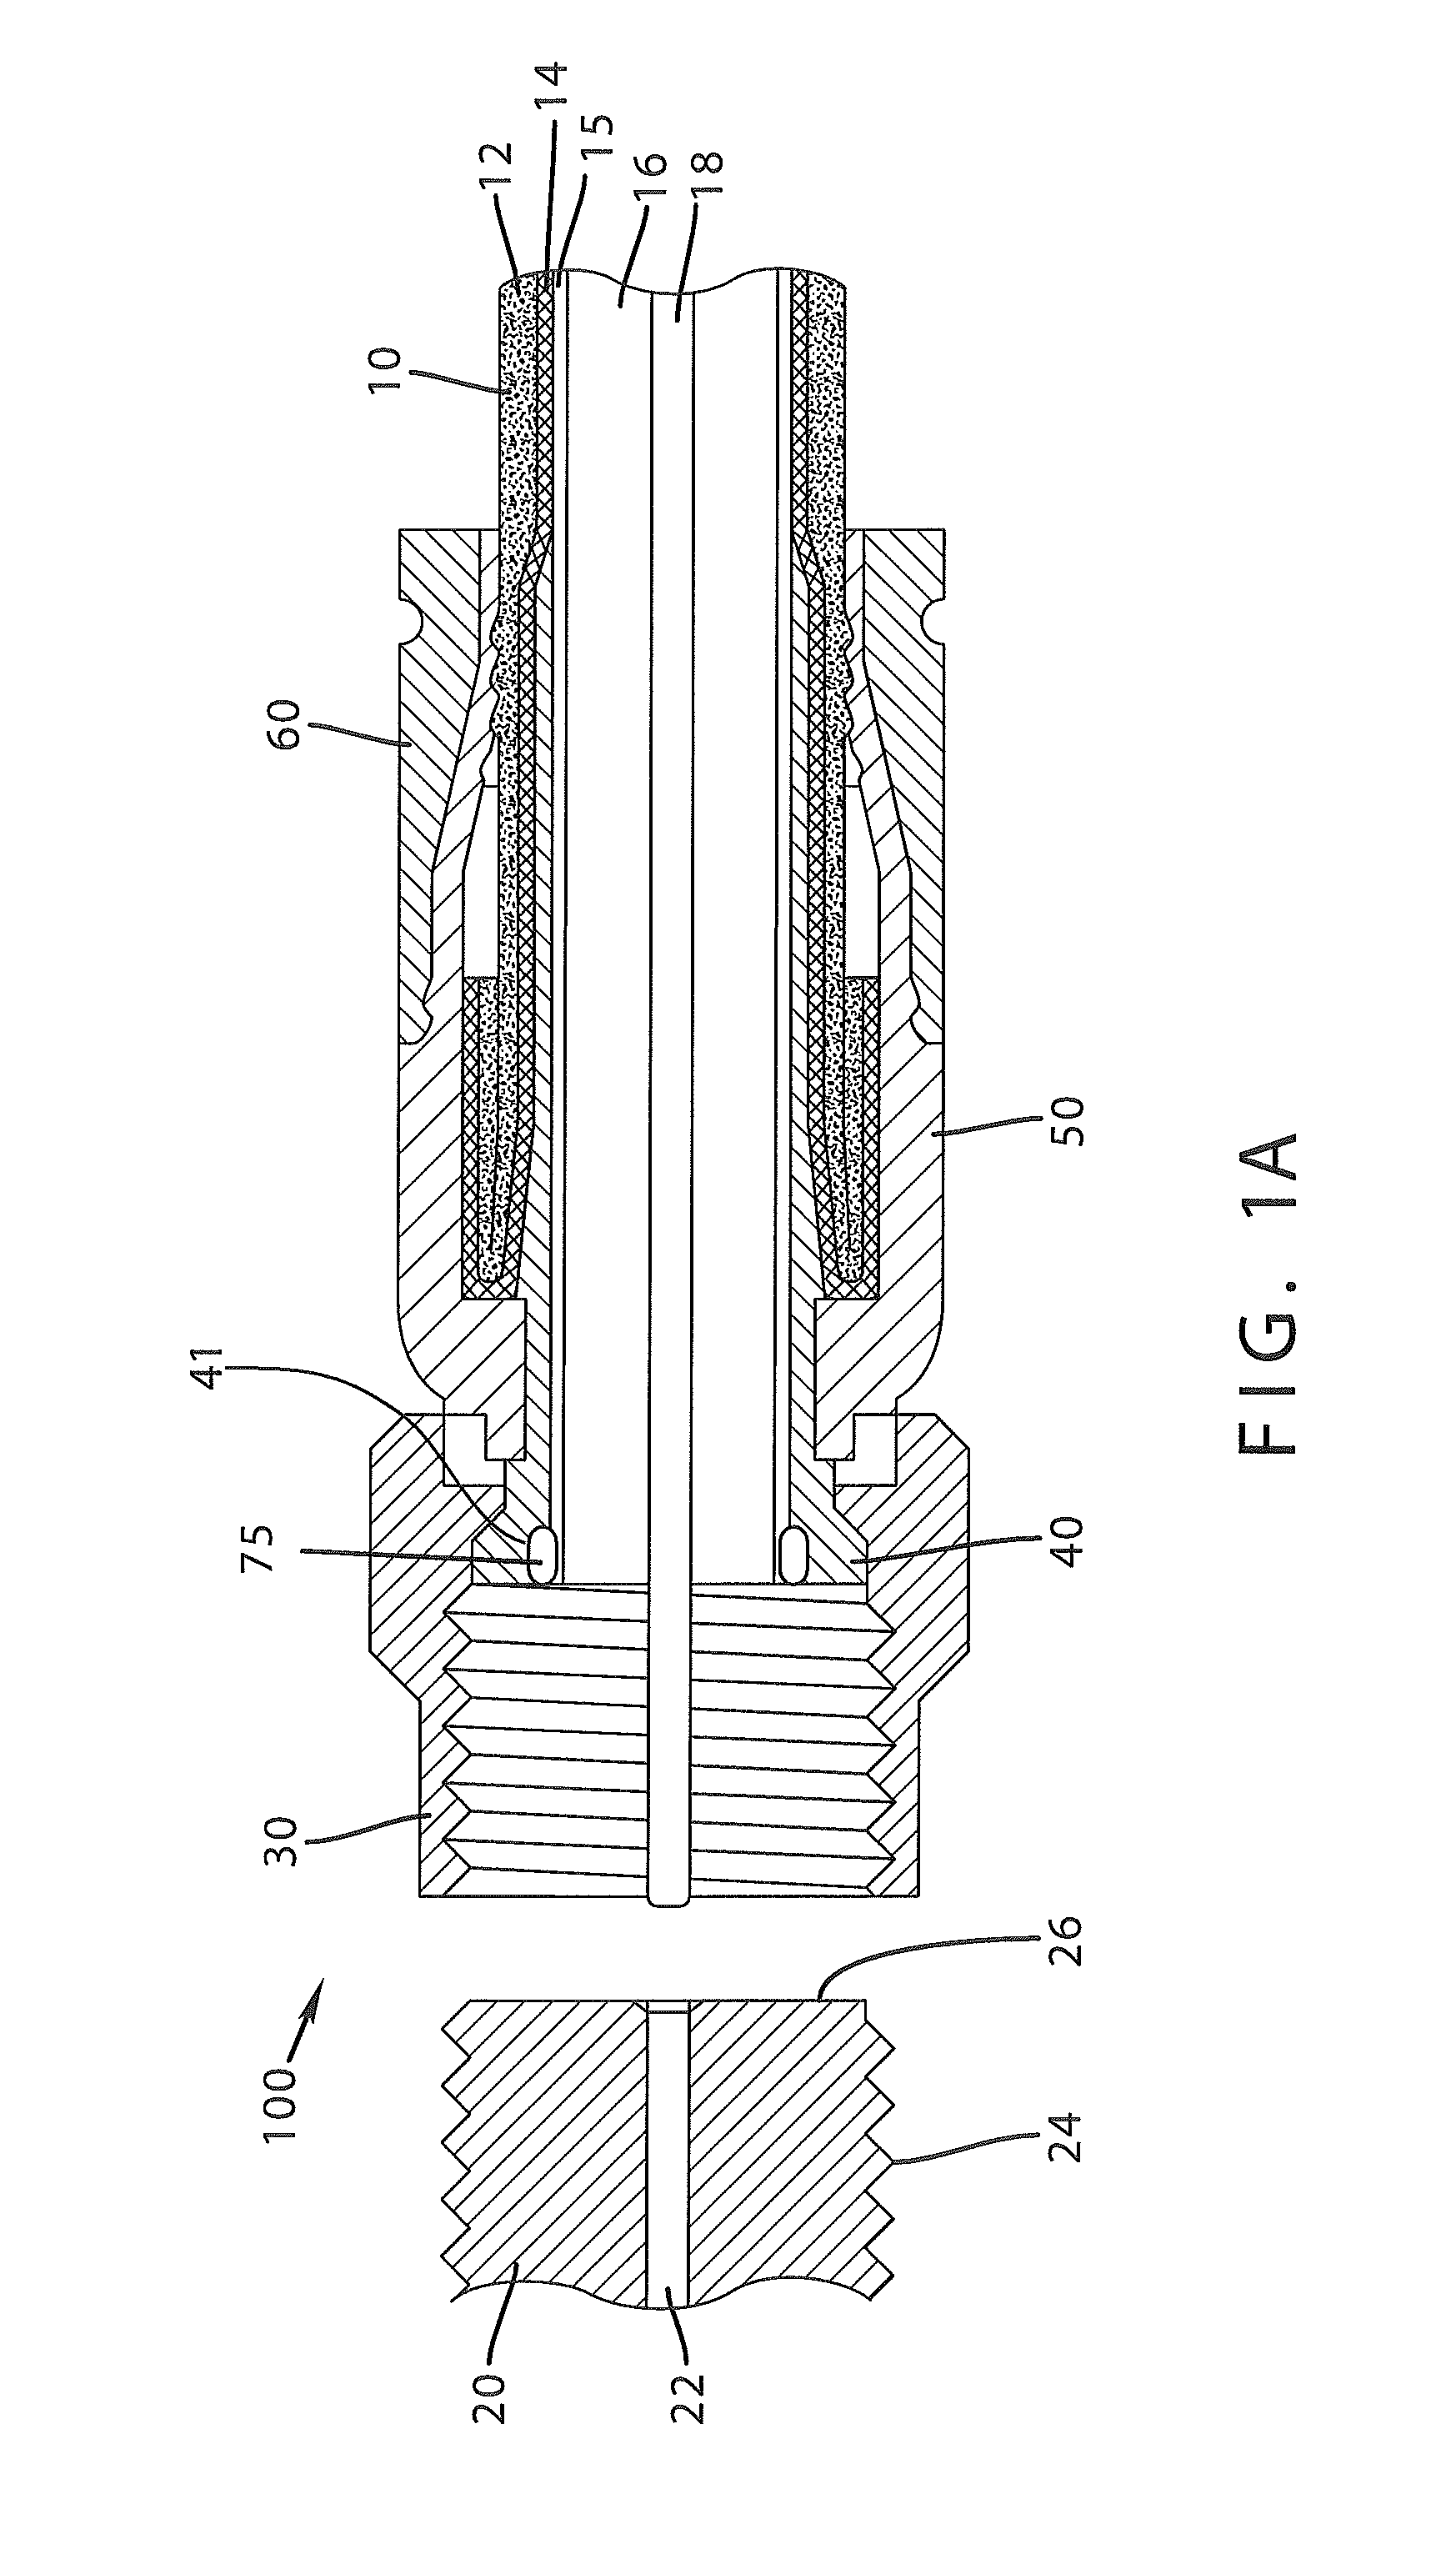 Dielectric sealing member and method of use thereof